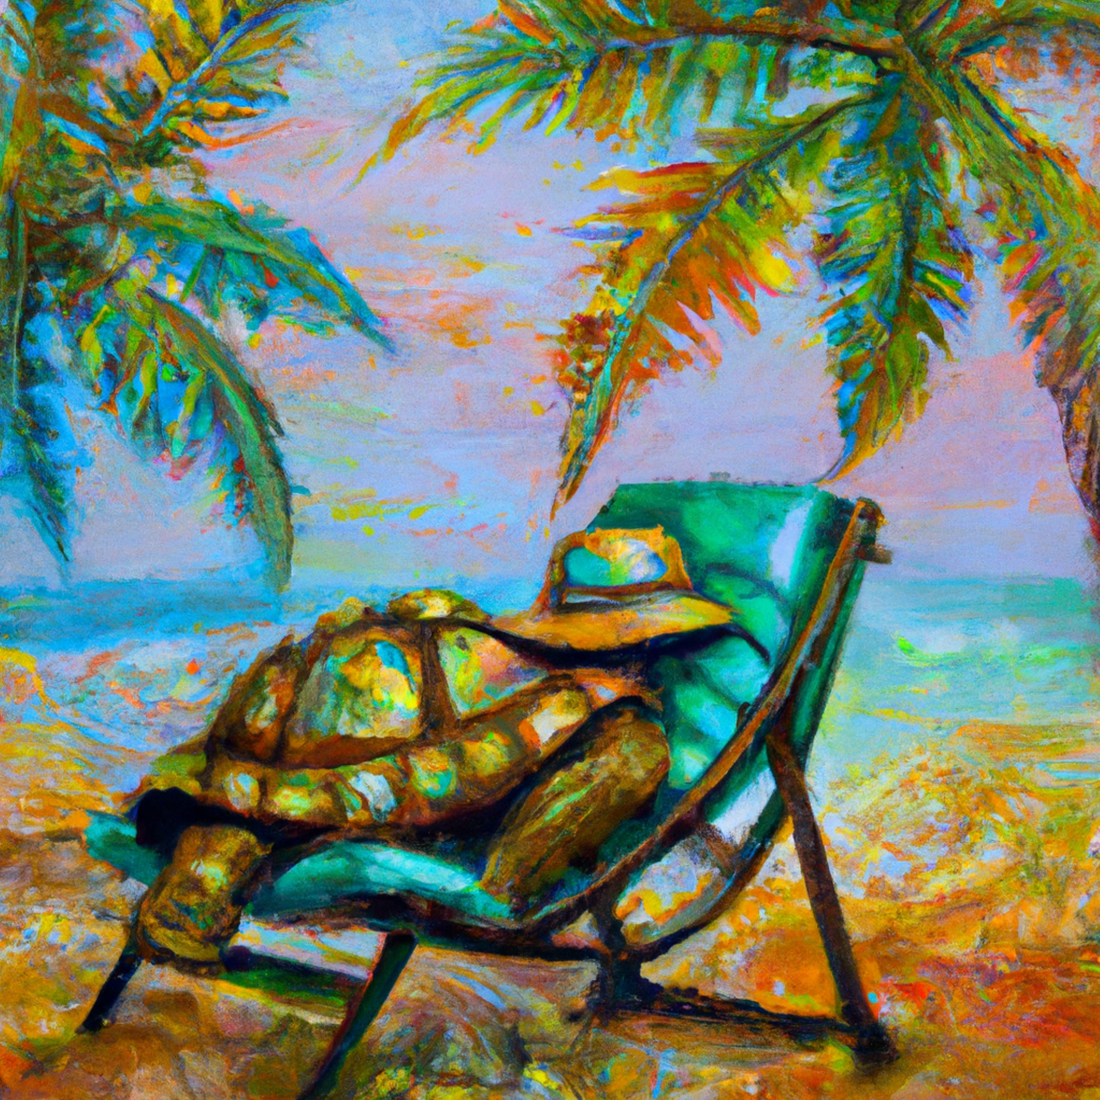 turtle wearing a hat sleeping on a beach chair